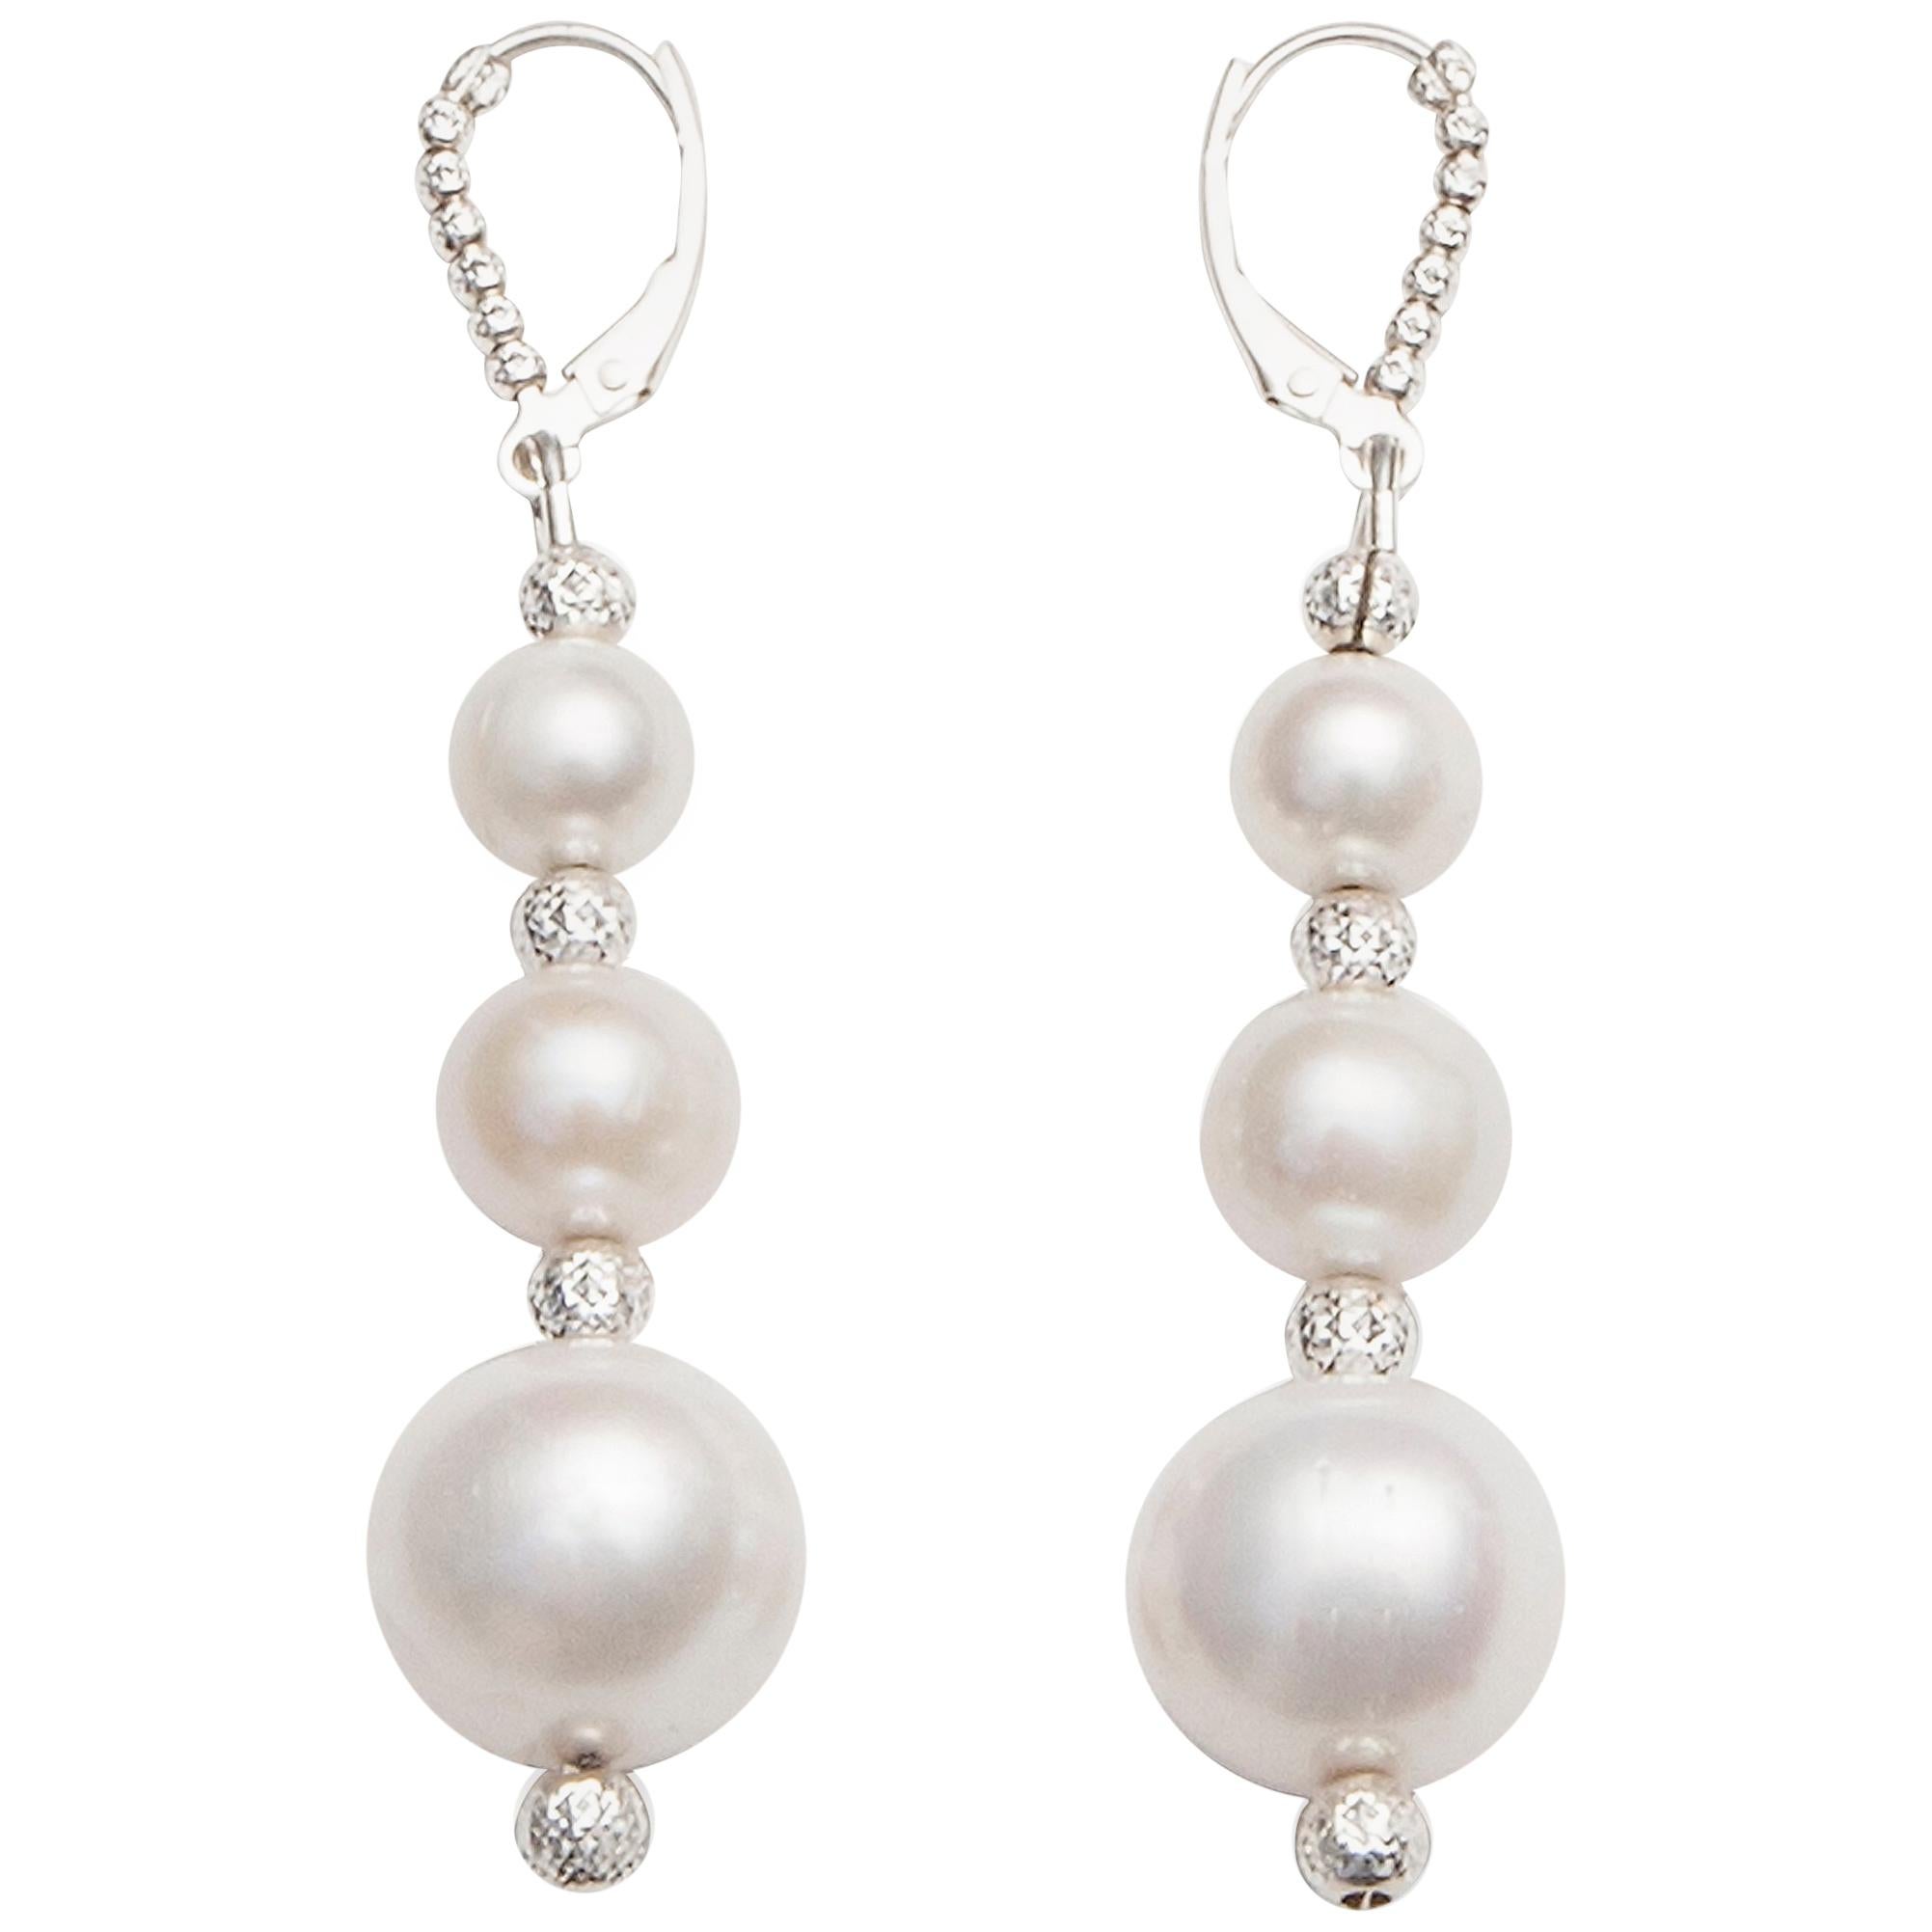 White Pearl Drop Earrings in a Three-Tiered Design For Sale